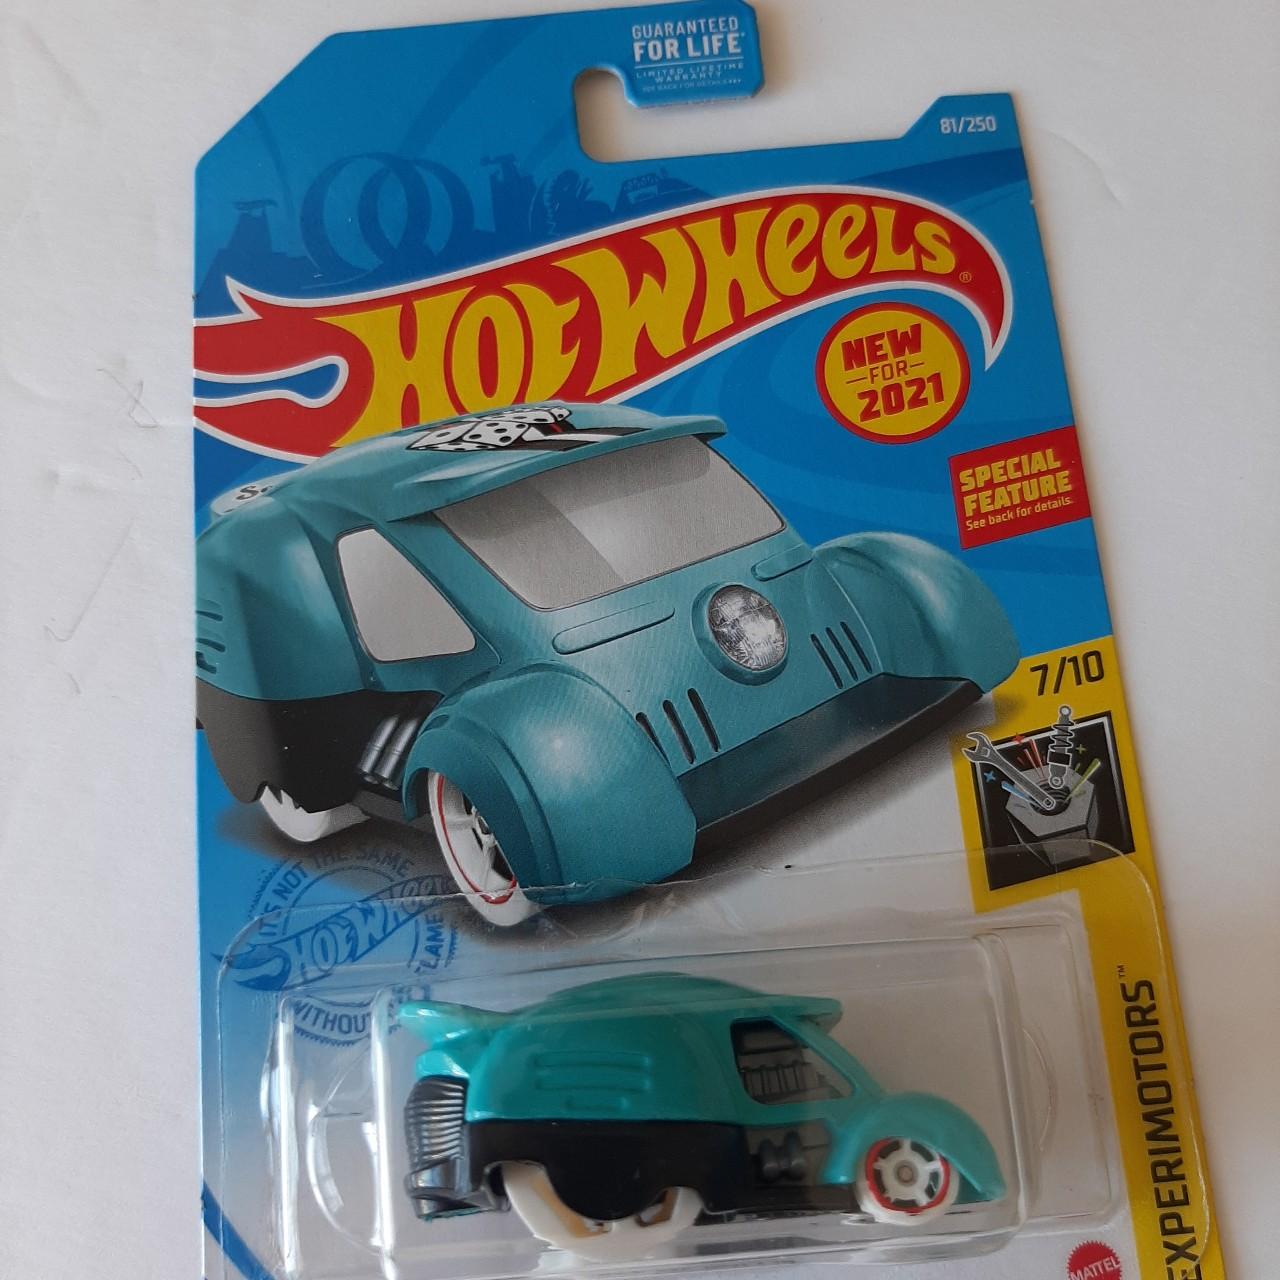 Today's purchases in Romania 😎 : r/HotWheels